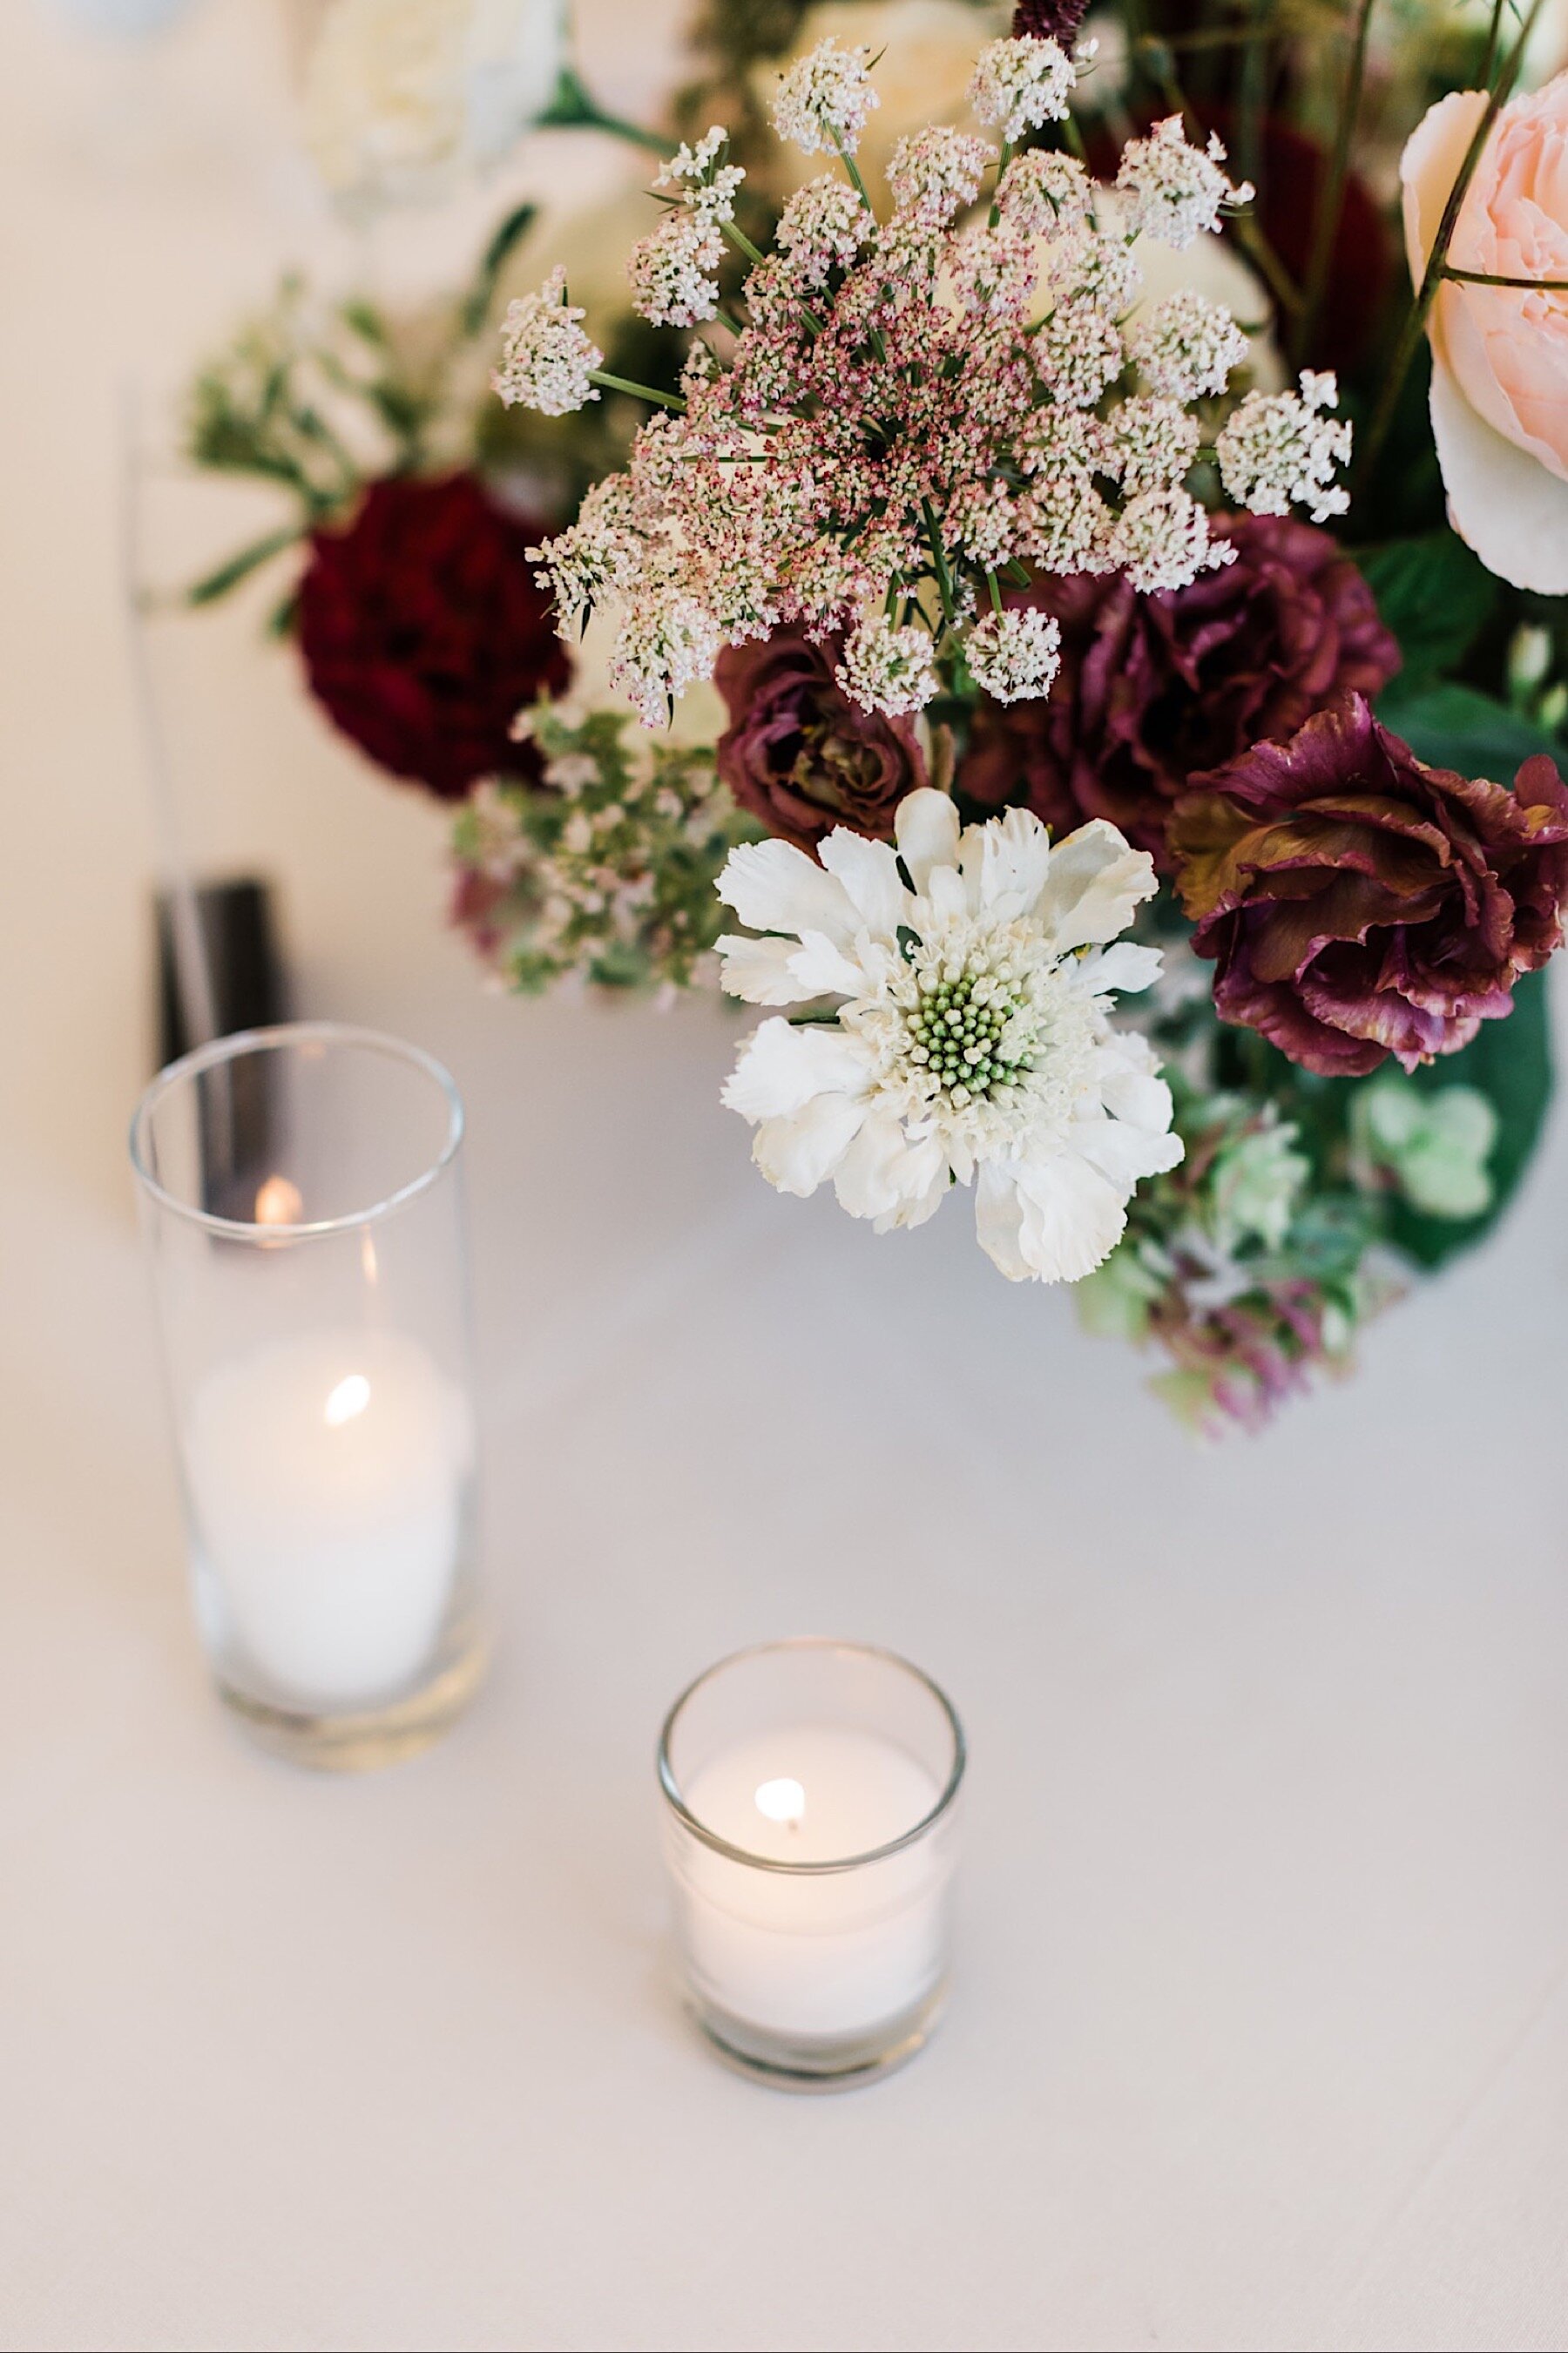 23_shaxton-ngo-430_A_Woodmark_floral_top_with_Florist_Gather_Design_from_Company_at_romantic_the_wedding_lush_Seattle_Wedding_design_Hotel.jpg